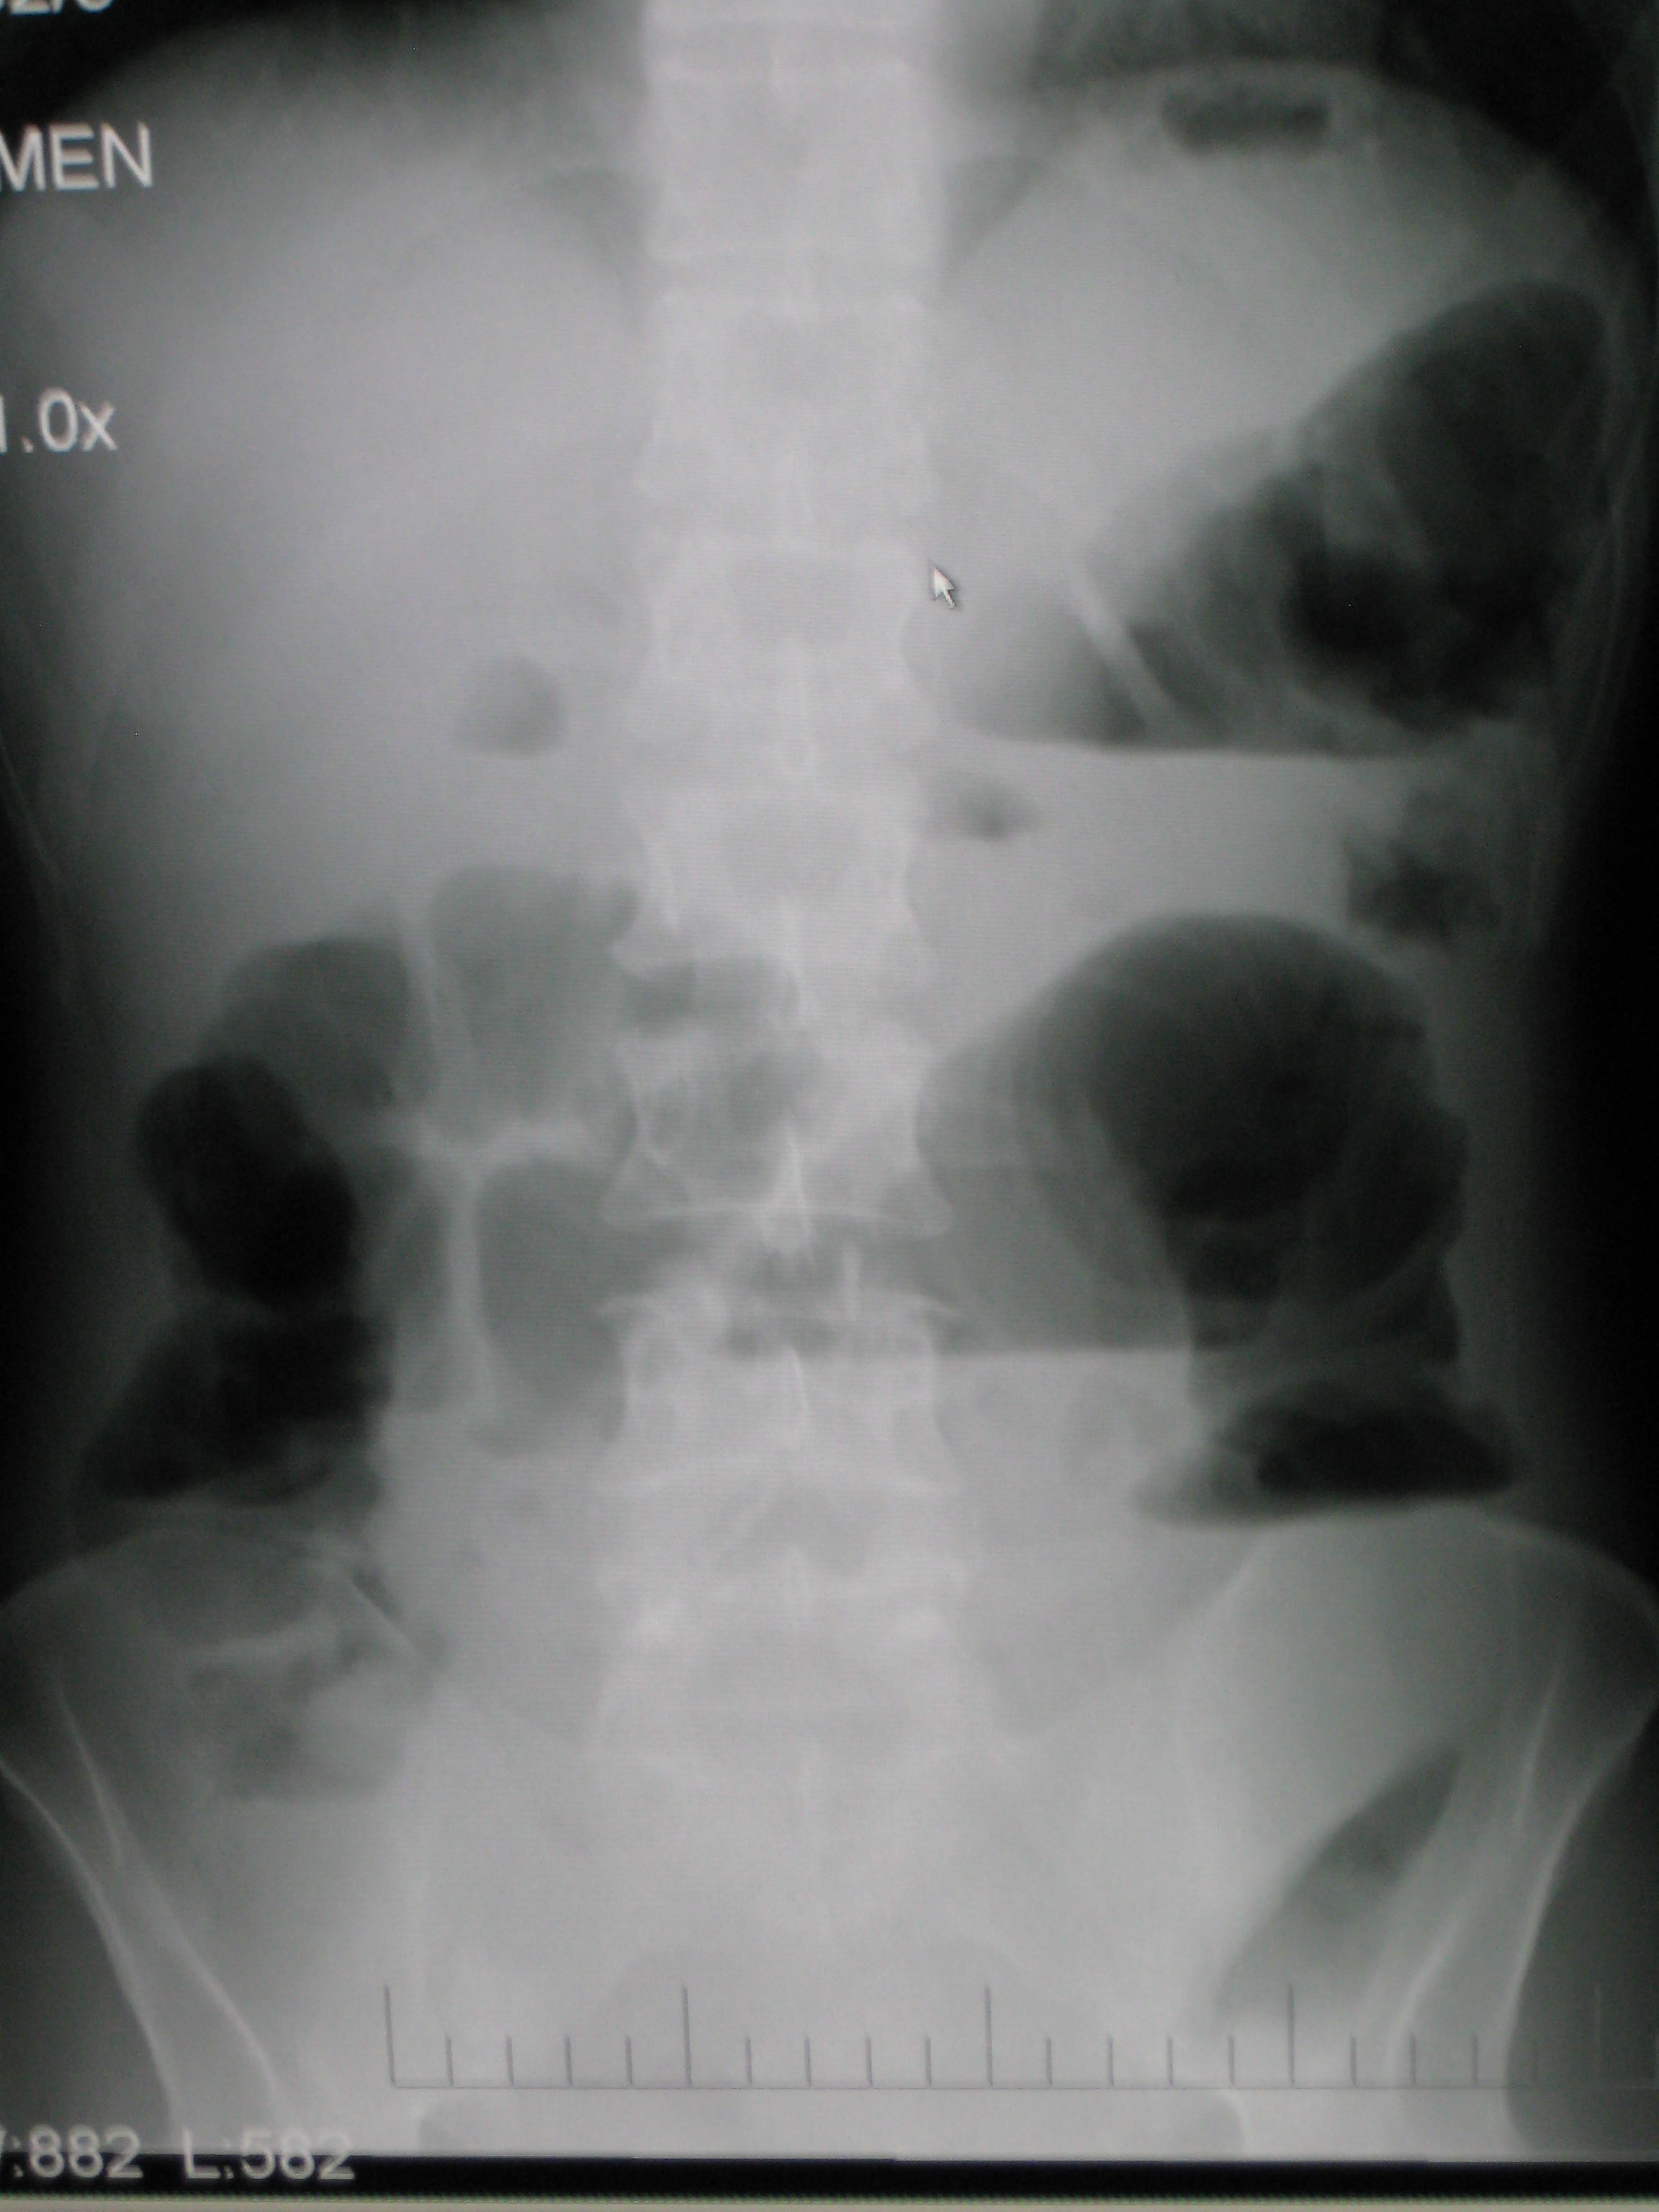 Upright abdominal X-ray demonstrating a small bowel obstruction. Note multiple air fluid levels.